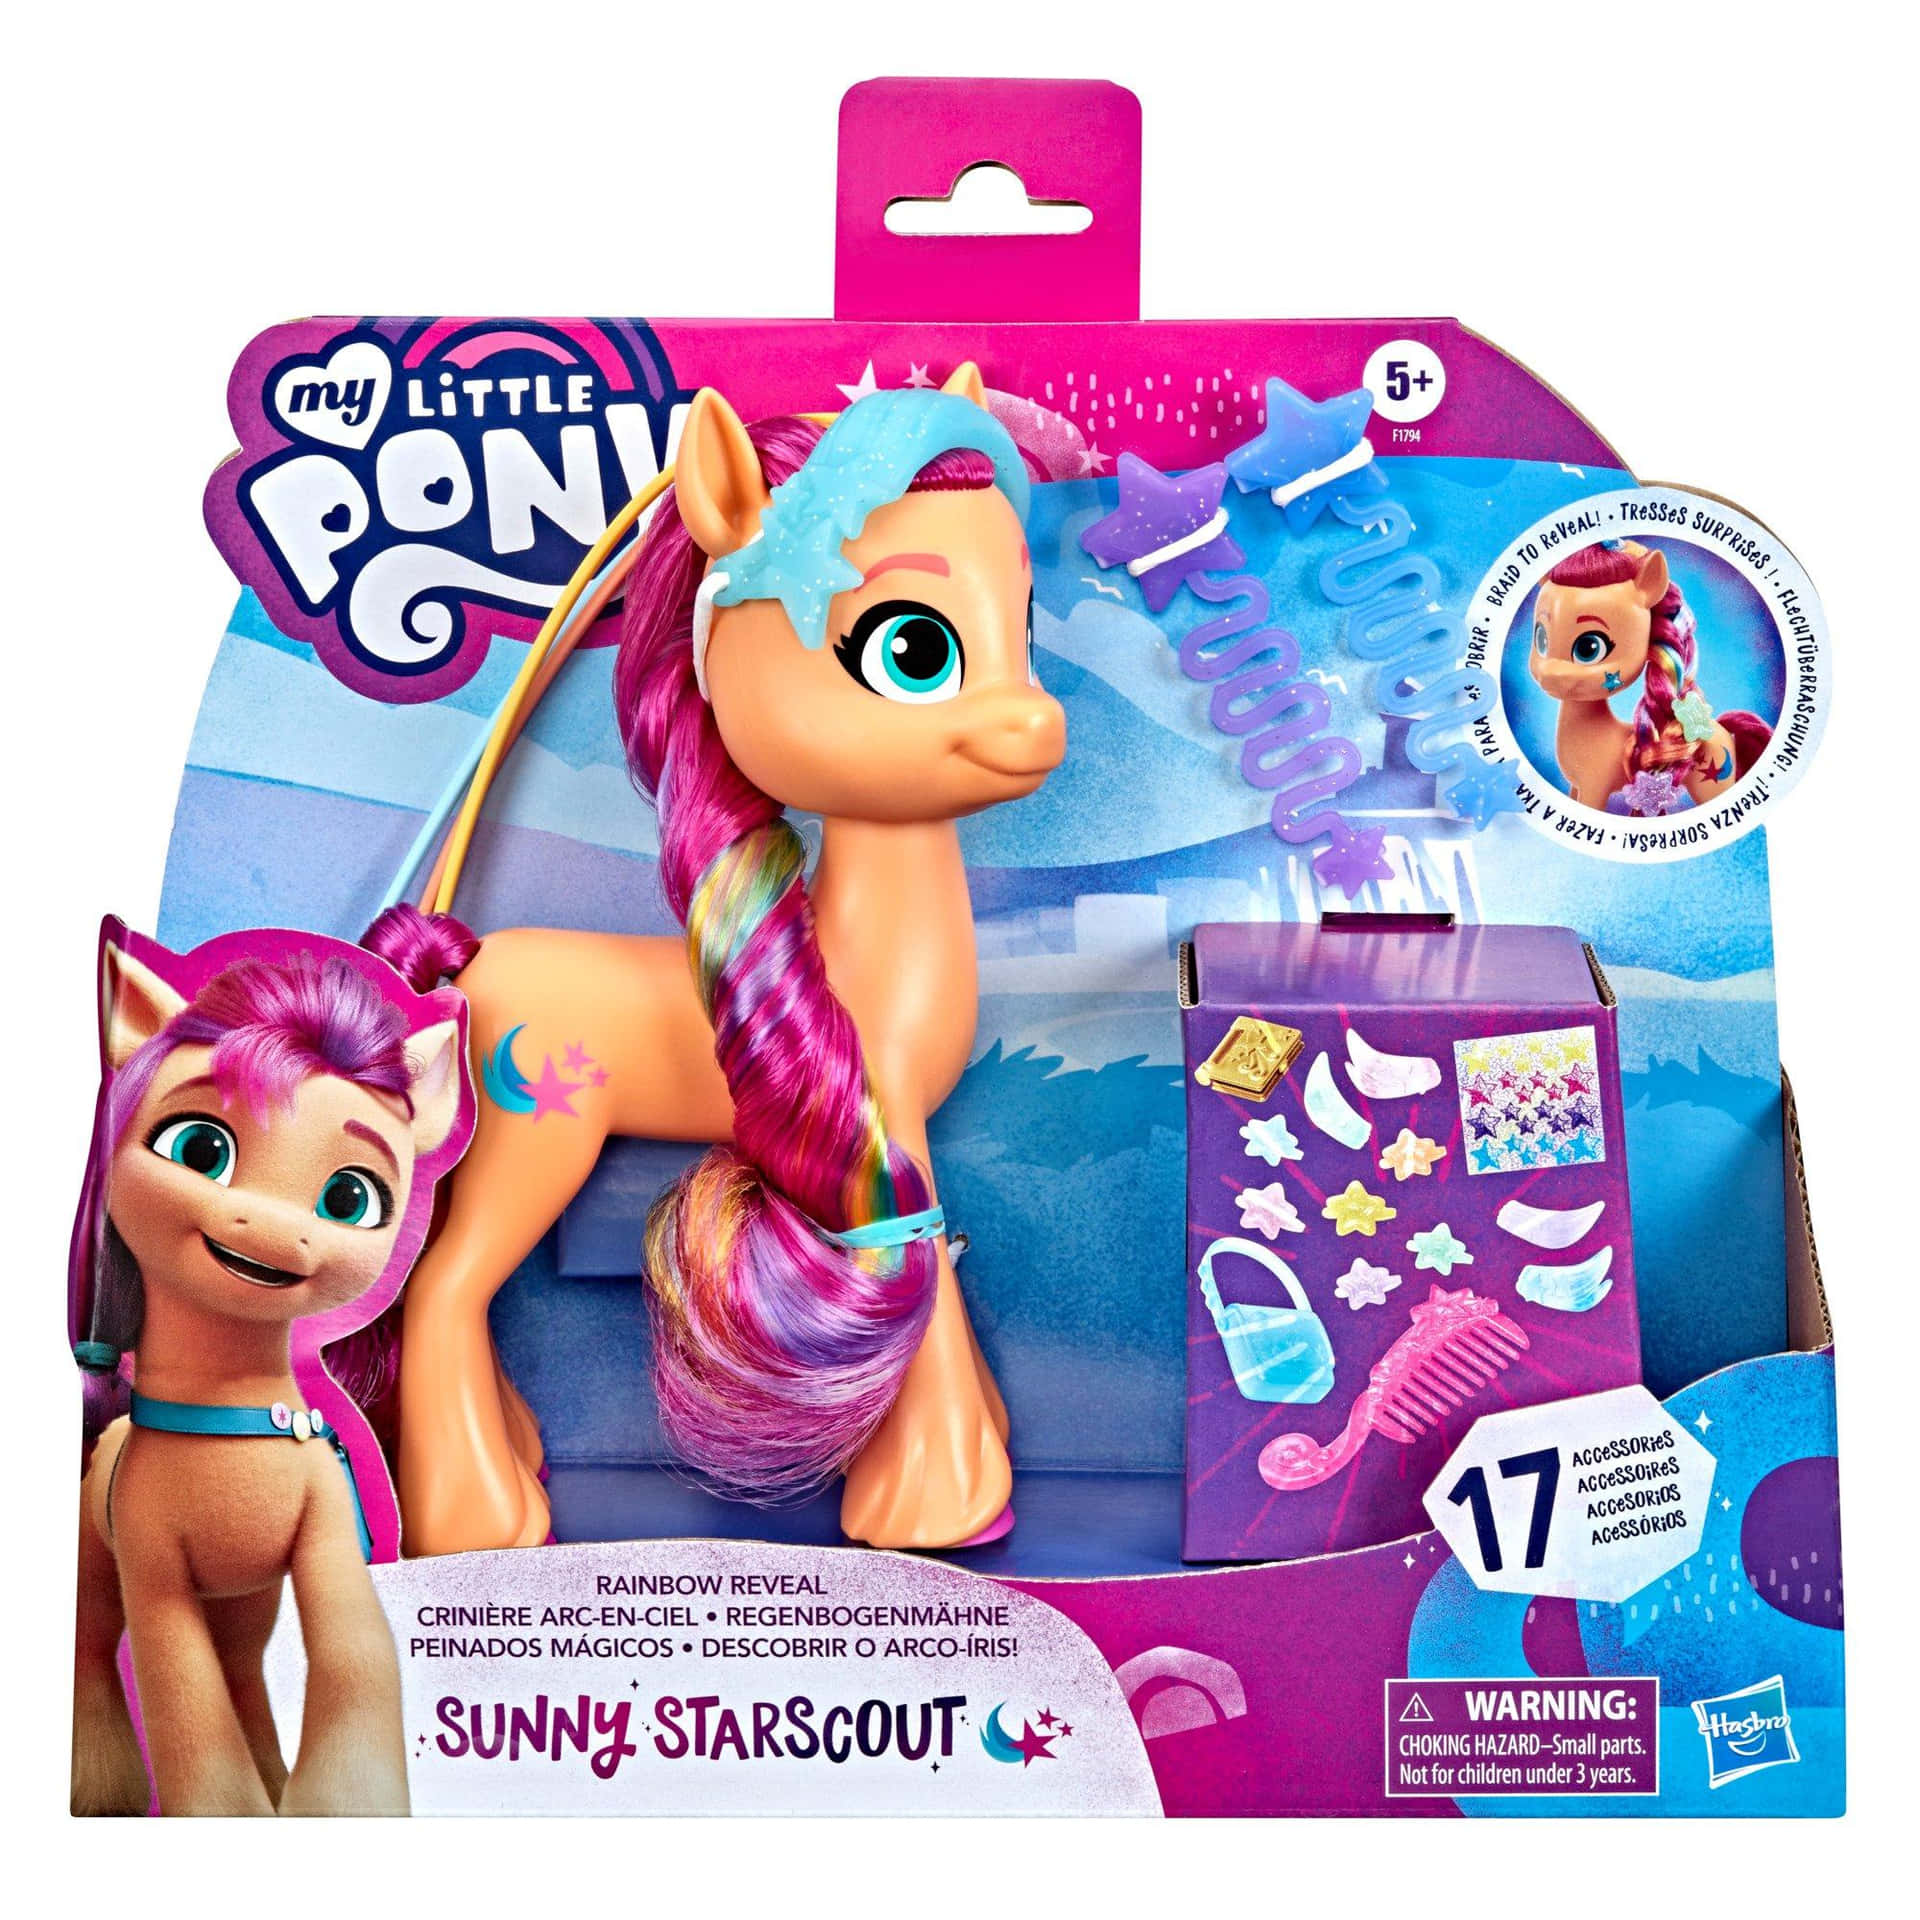 My Little Pony Sunny Starscout Toy Picture